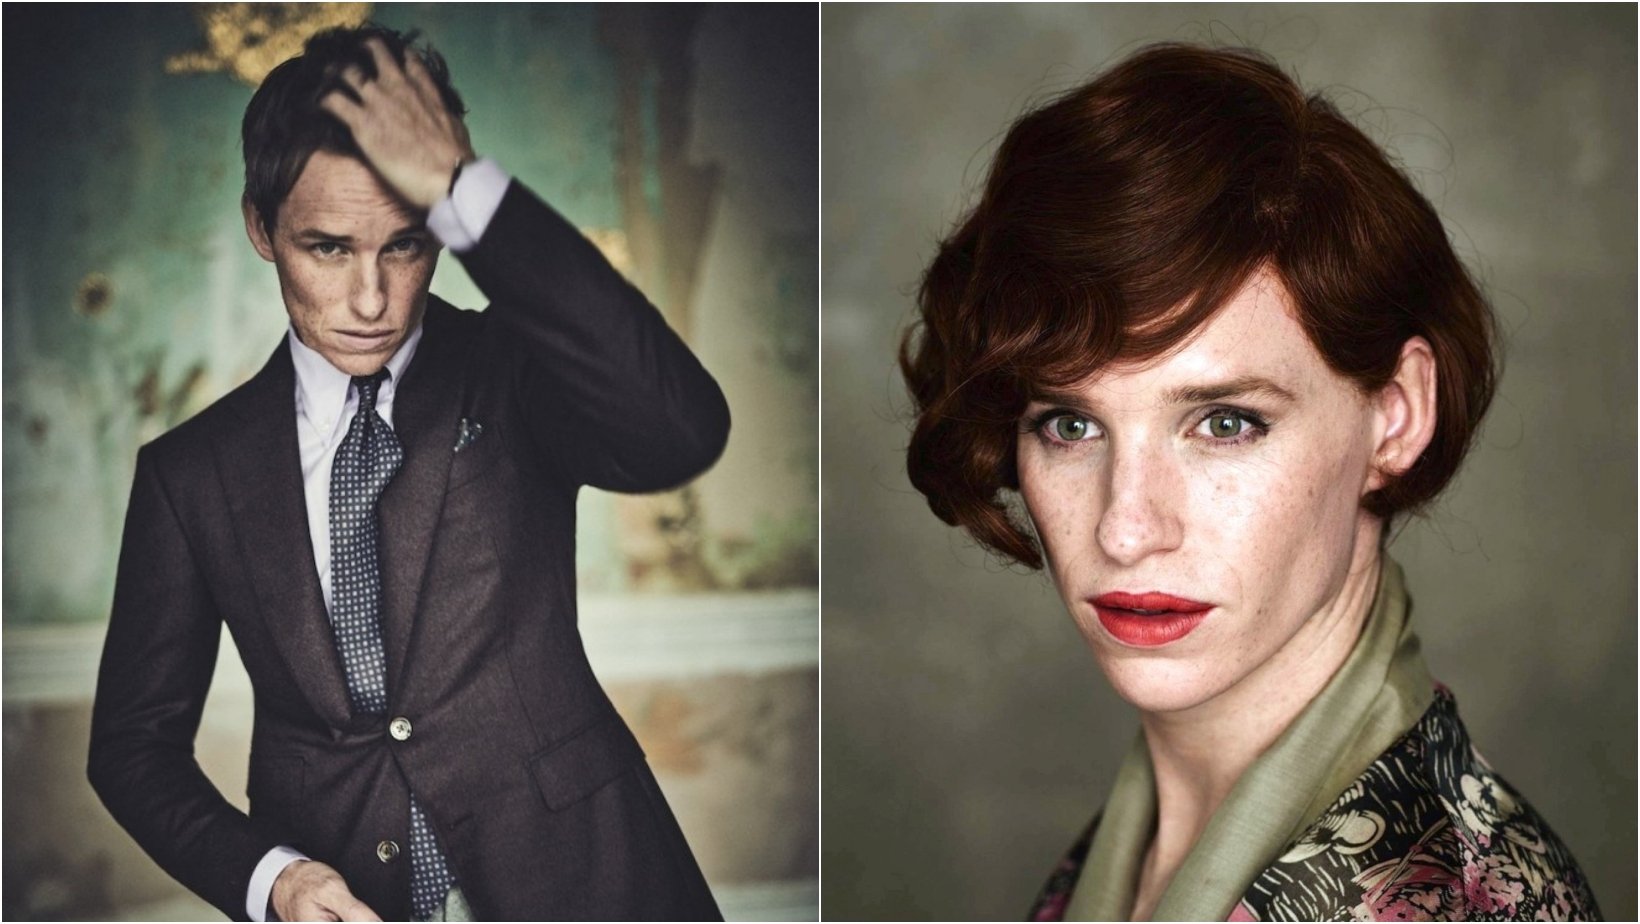 cover 1.jpg?resize=1200,630 - Eddie Redmayne Admitted That Playing A Transgender Woman Role Was A MISTAKE, Adding The If He Was Offered The Role Now, He Would NOT Accept It